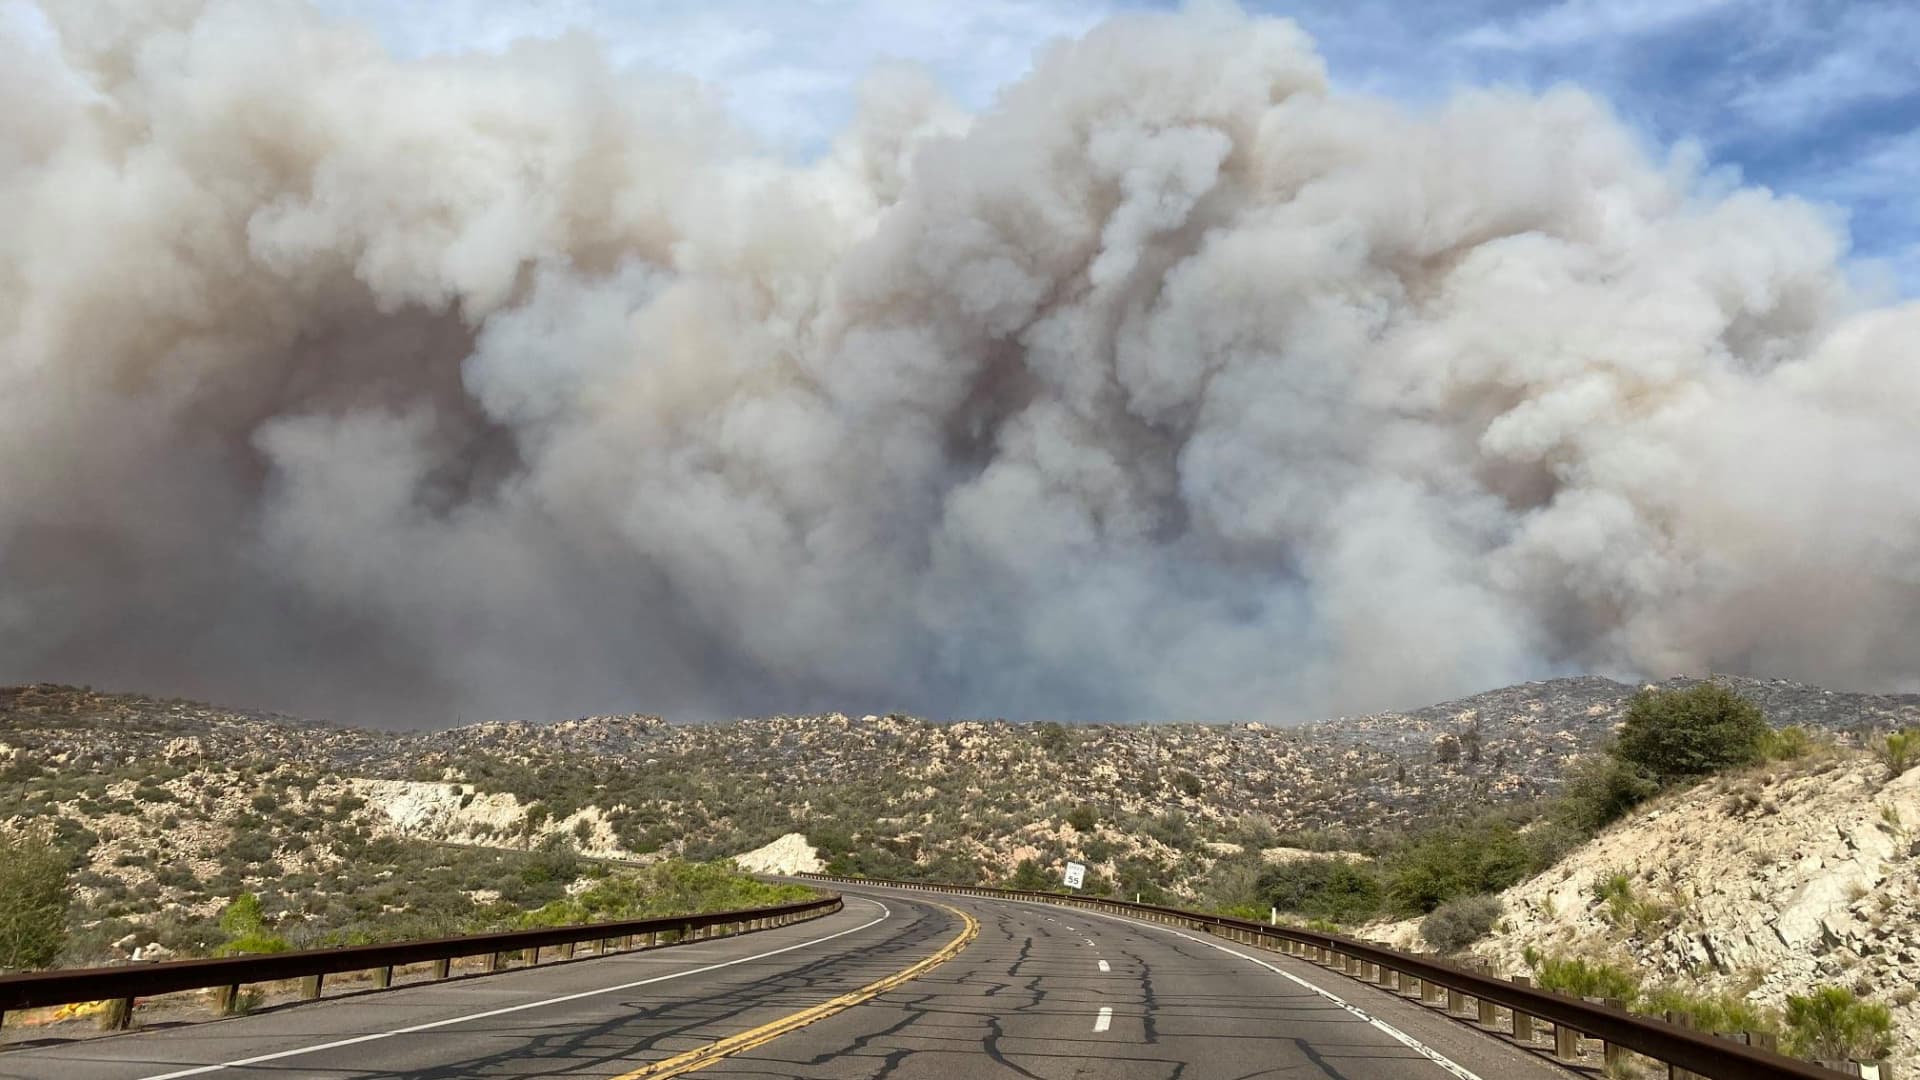 Smoke plumes rise from a blaze as a wildfire rages on in Arizona, U.S., June 7, 2021, in this image obtained from social media.